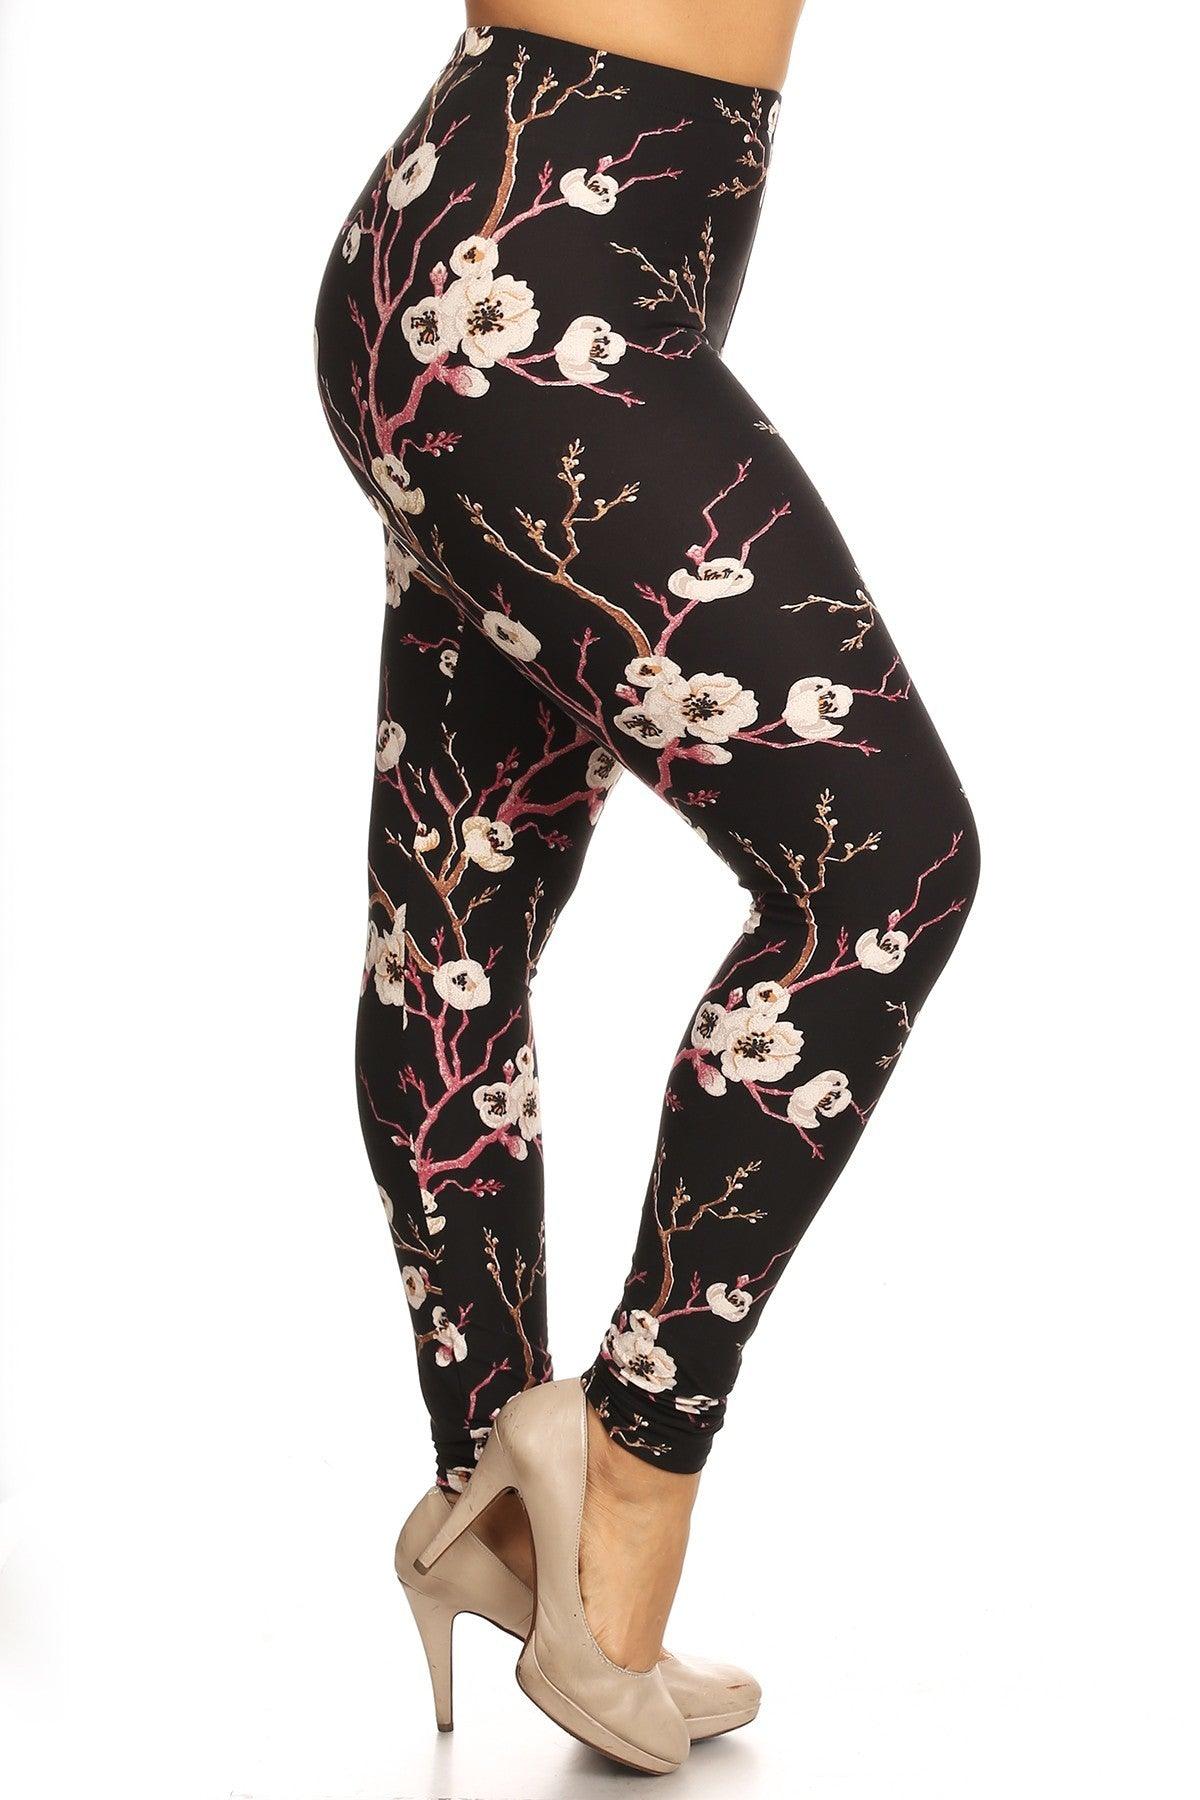 Plus Size Floral Print, Full Length Leggings In A Slim Fitting Style With A Banded High Waist - Kreative Passions